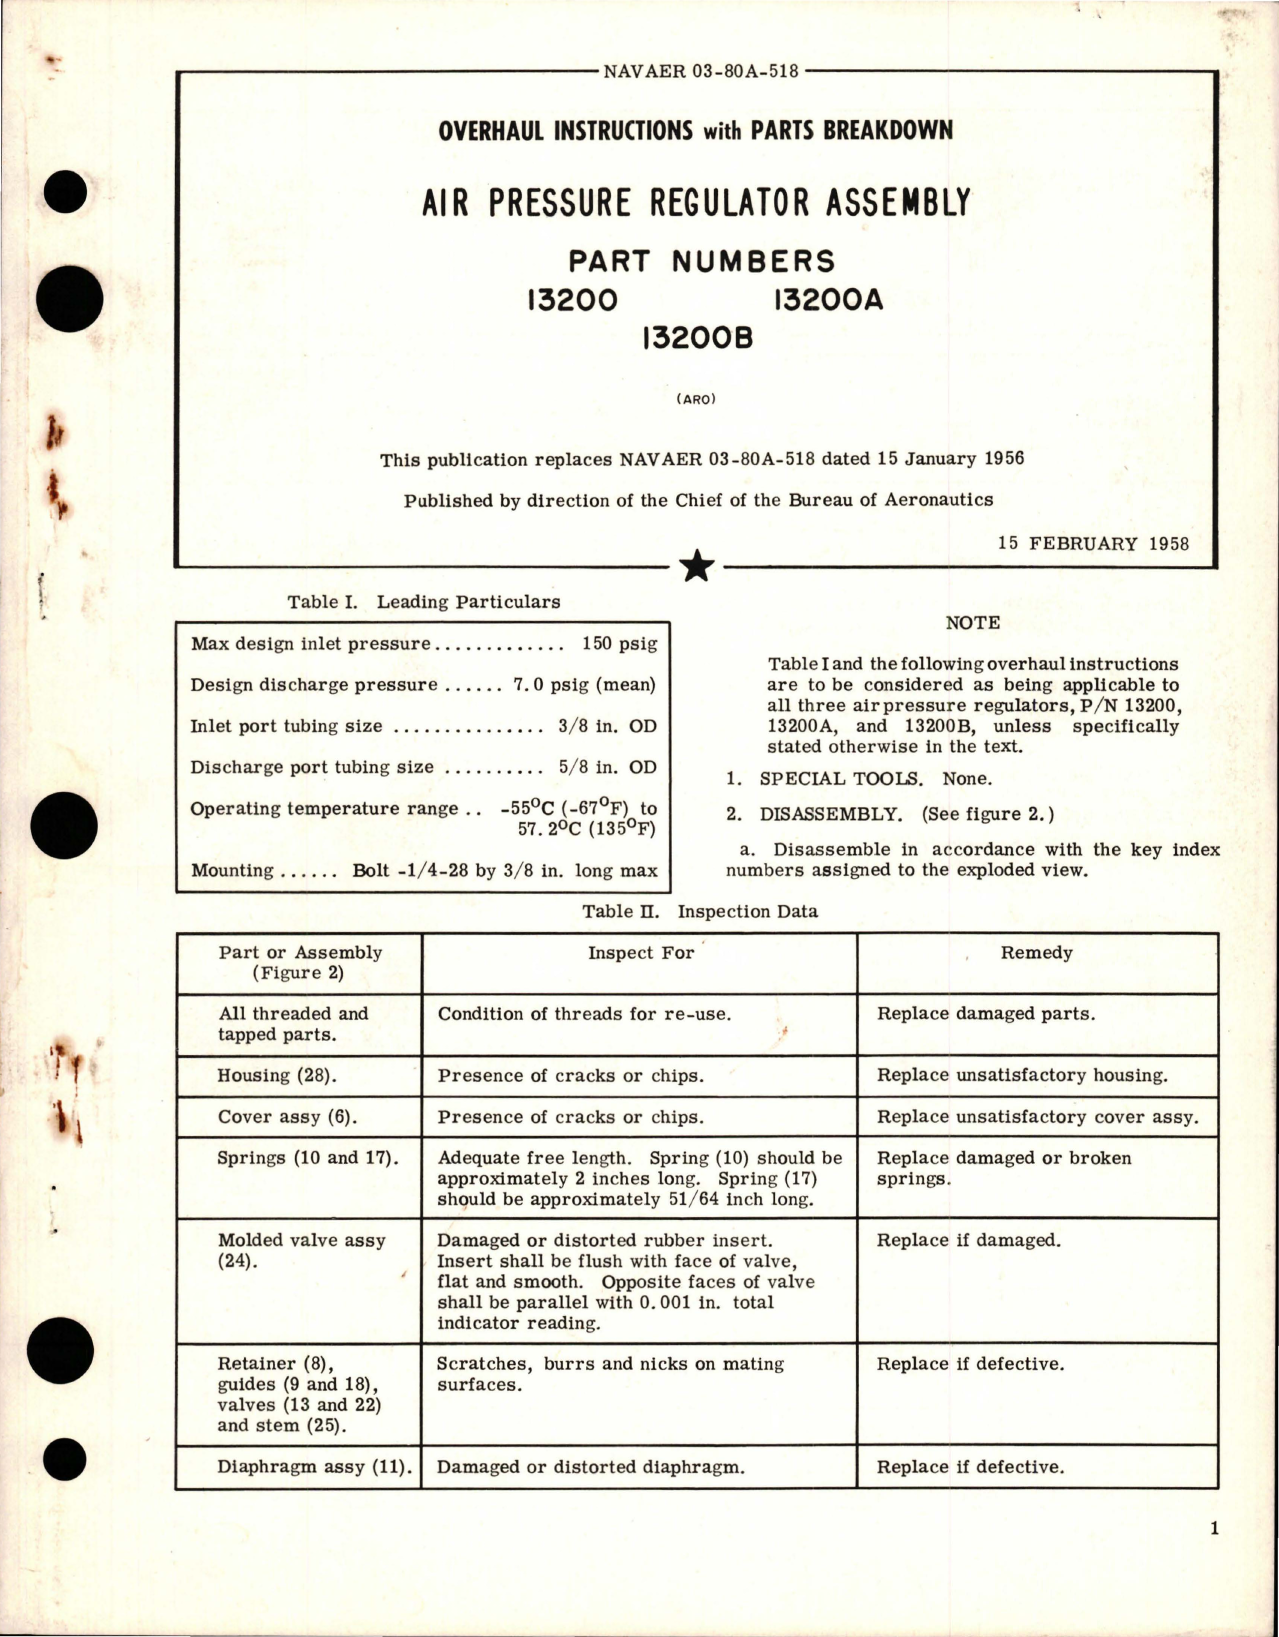 Sample page 1 from AirCorps Library document: Overhaul Instructions with Parts Breakdown for Air Pressure Regulator Assembly - Parts 13200, 13200A and 13200B 